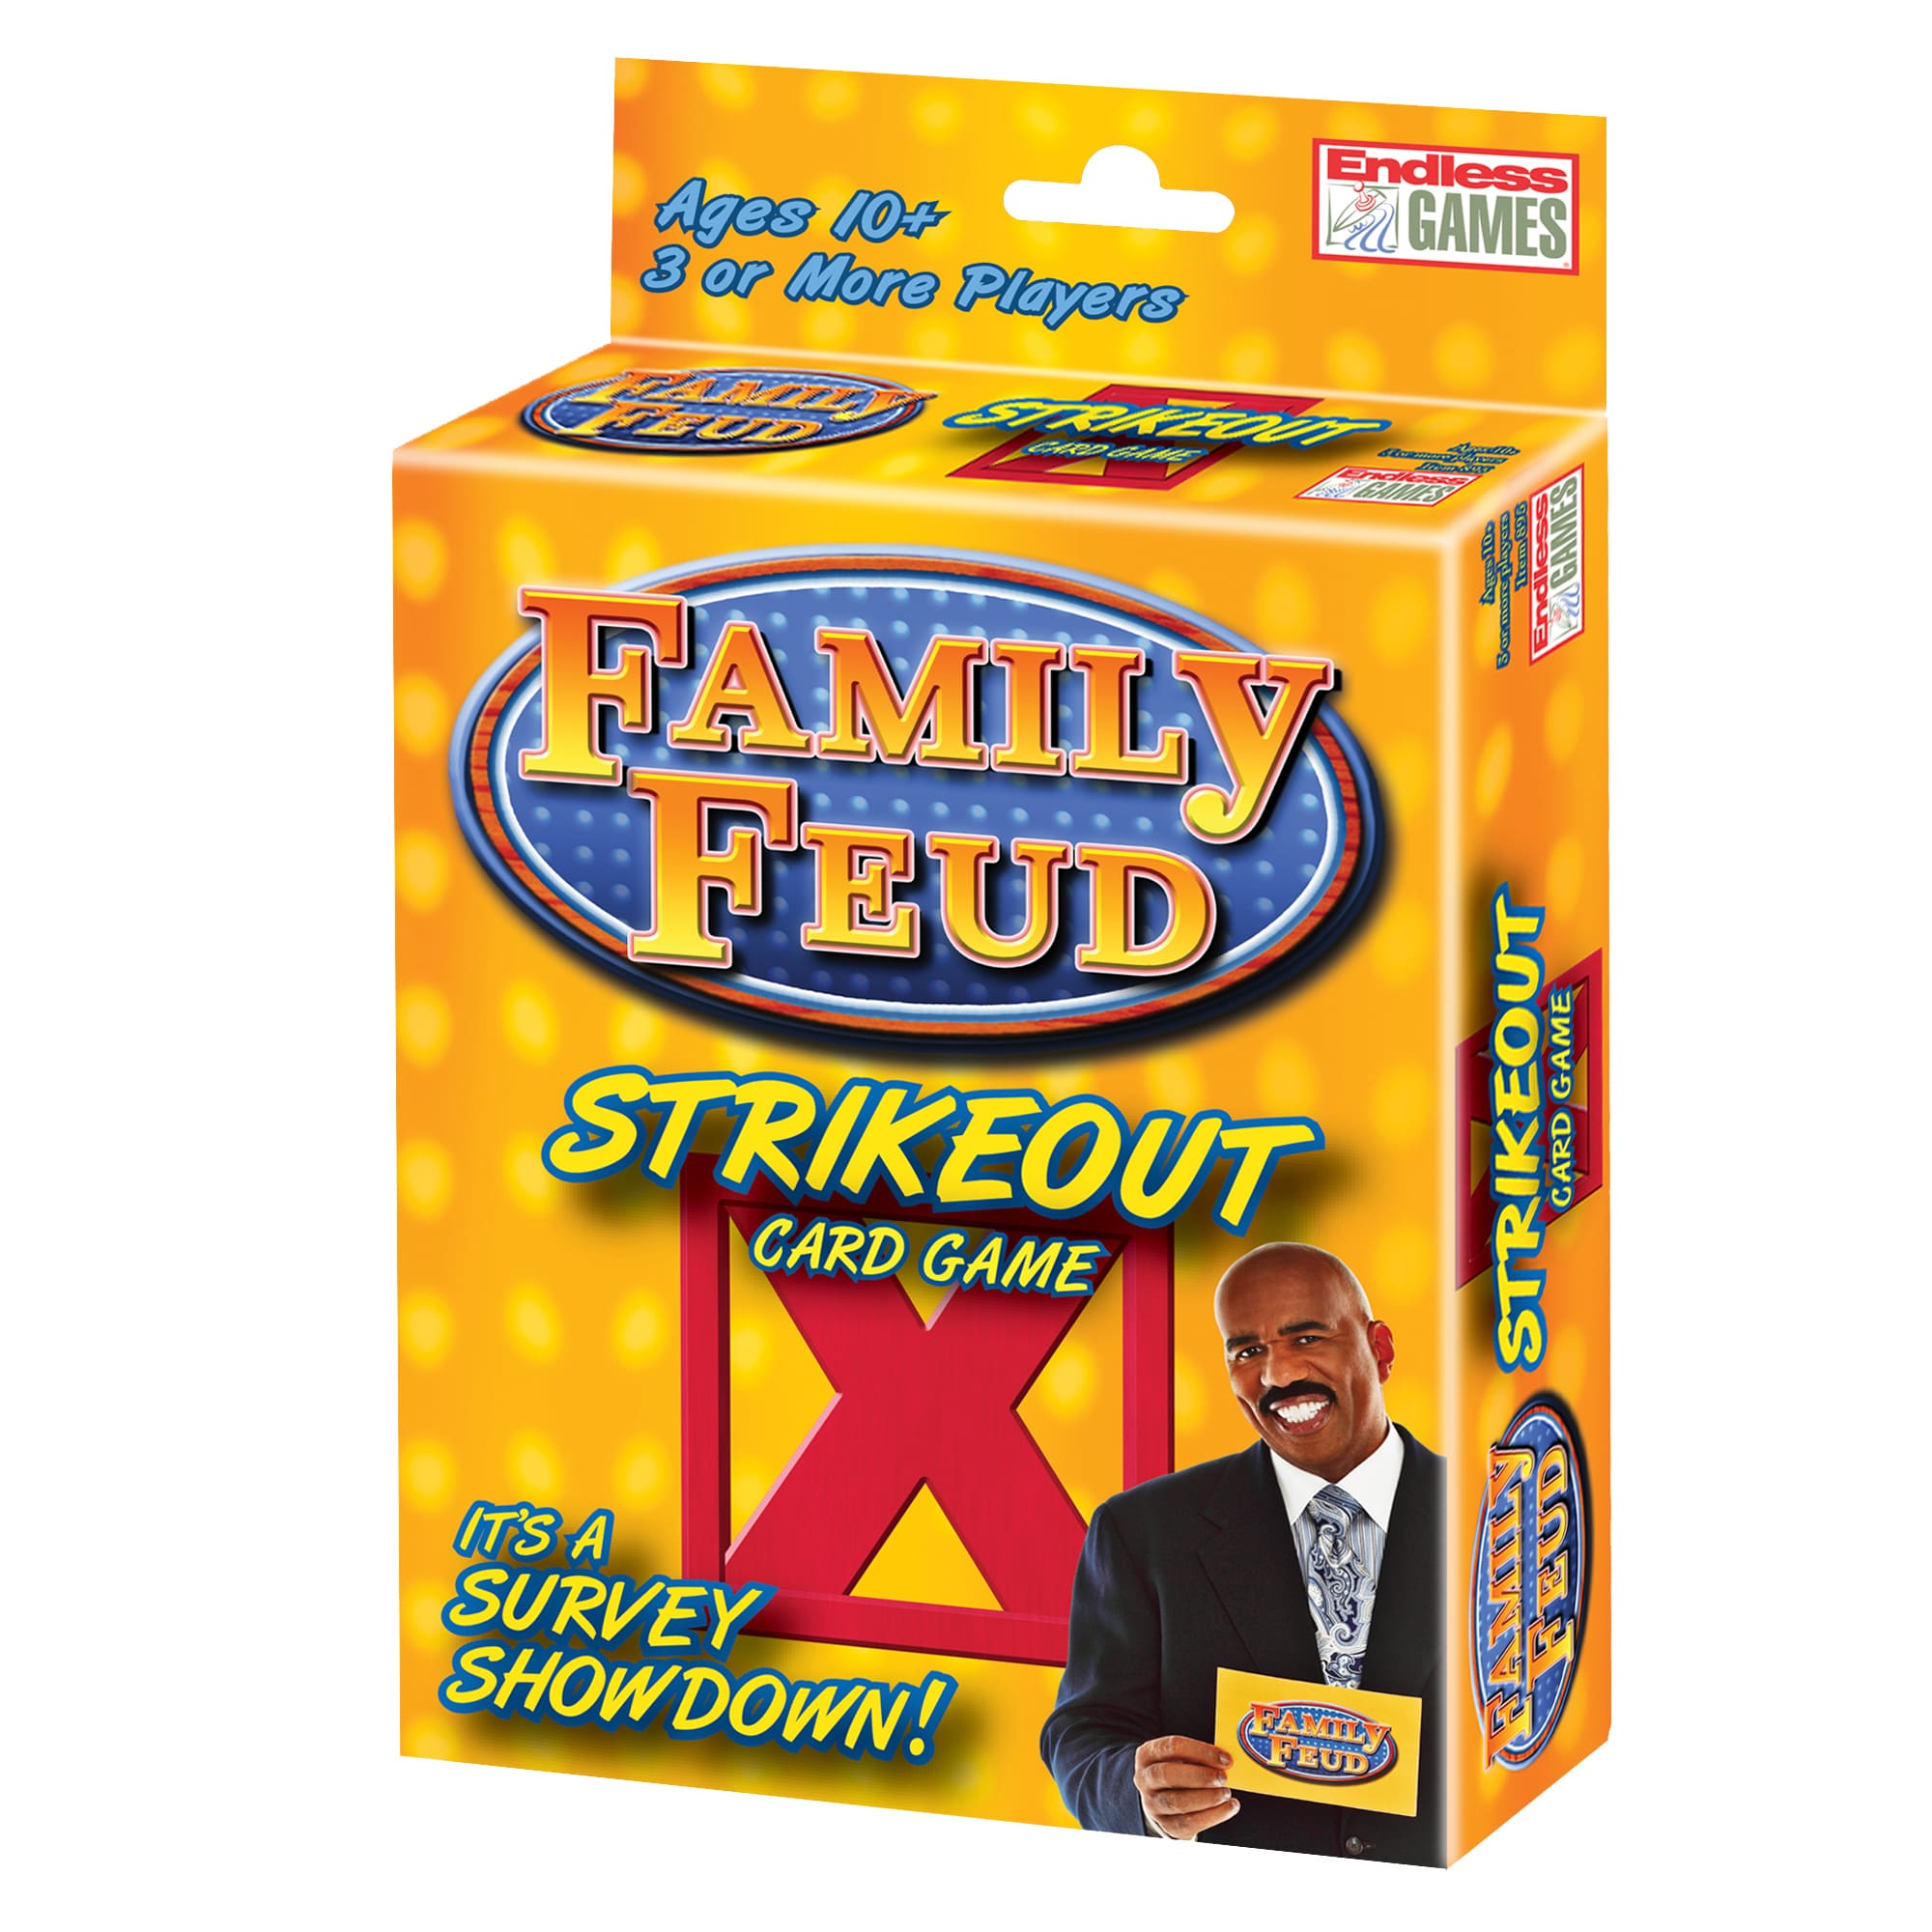 Family Feud Strike Out Card Game - image 2 of 2